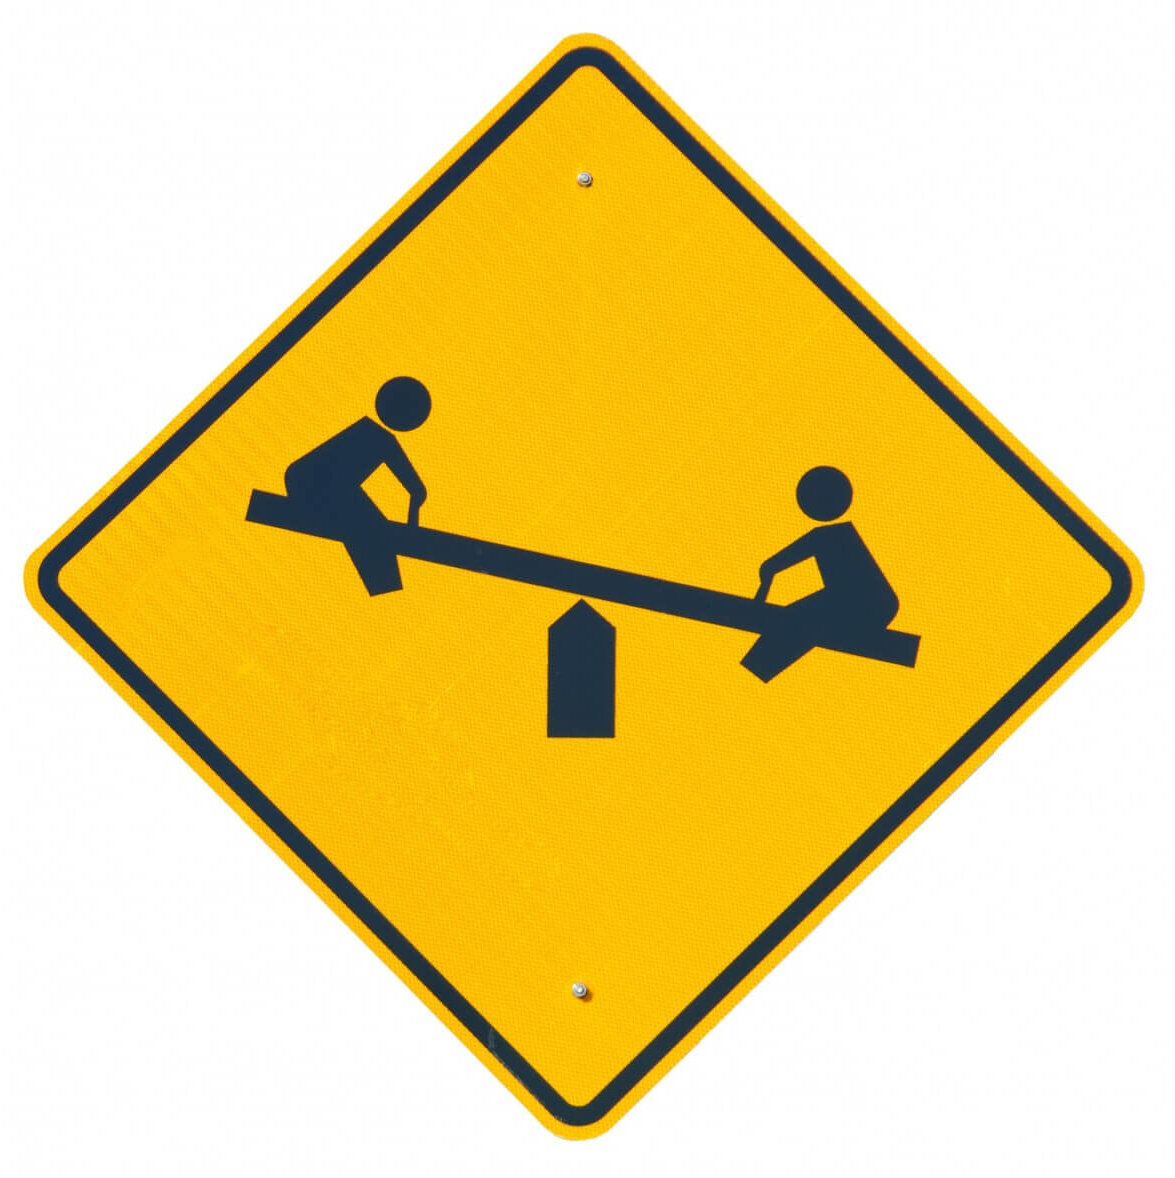 children_at_play_sign_warning_child_playing_symbol_text_caution